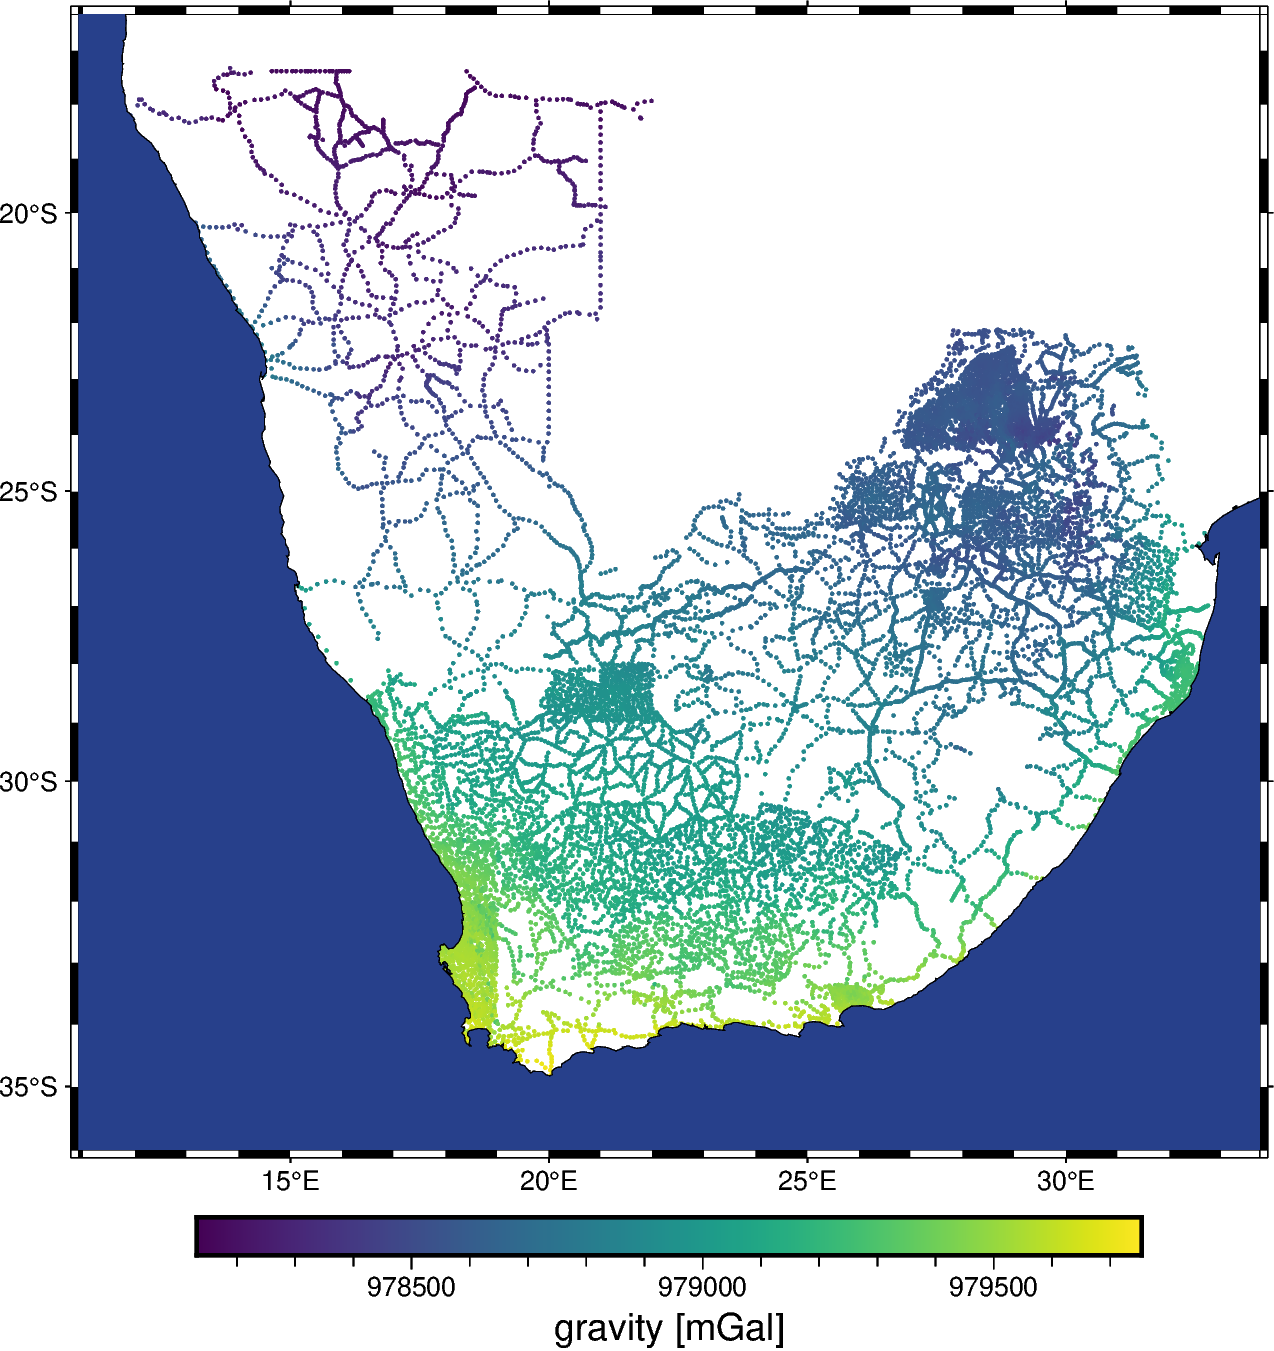 southern africa gravity